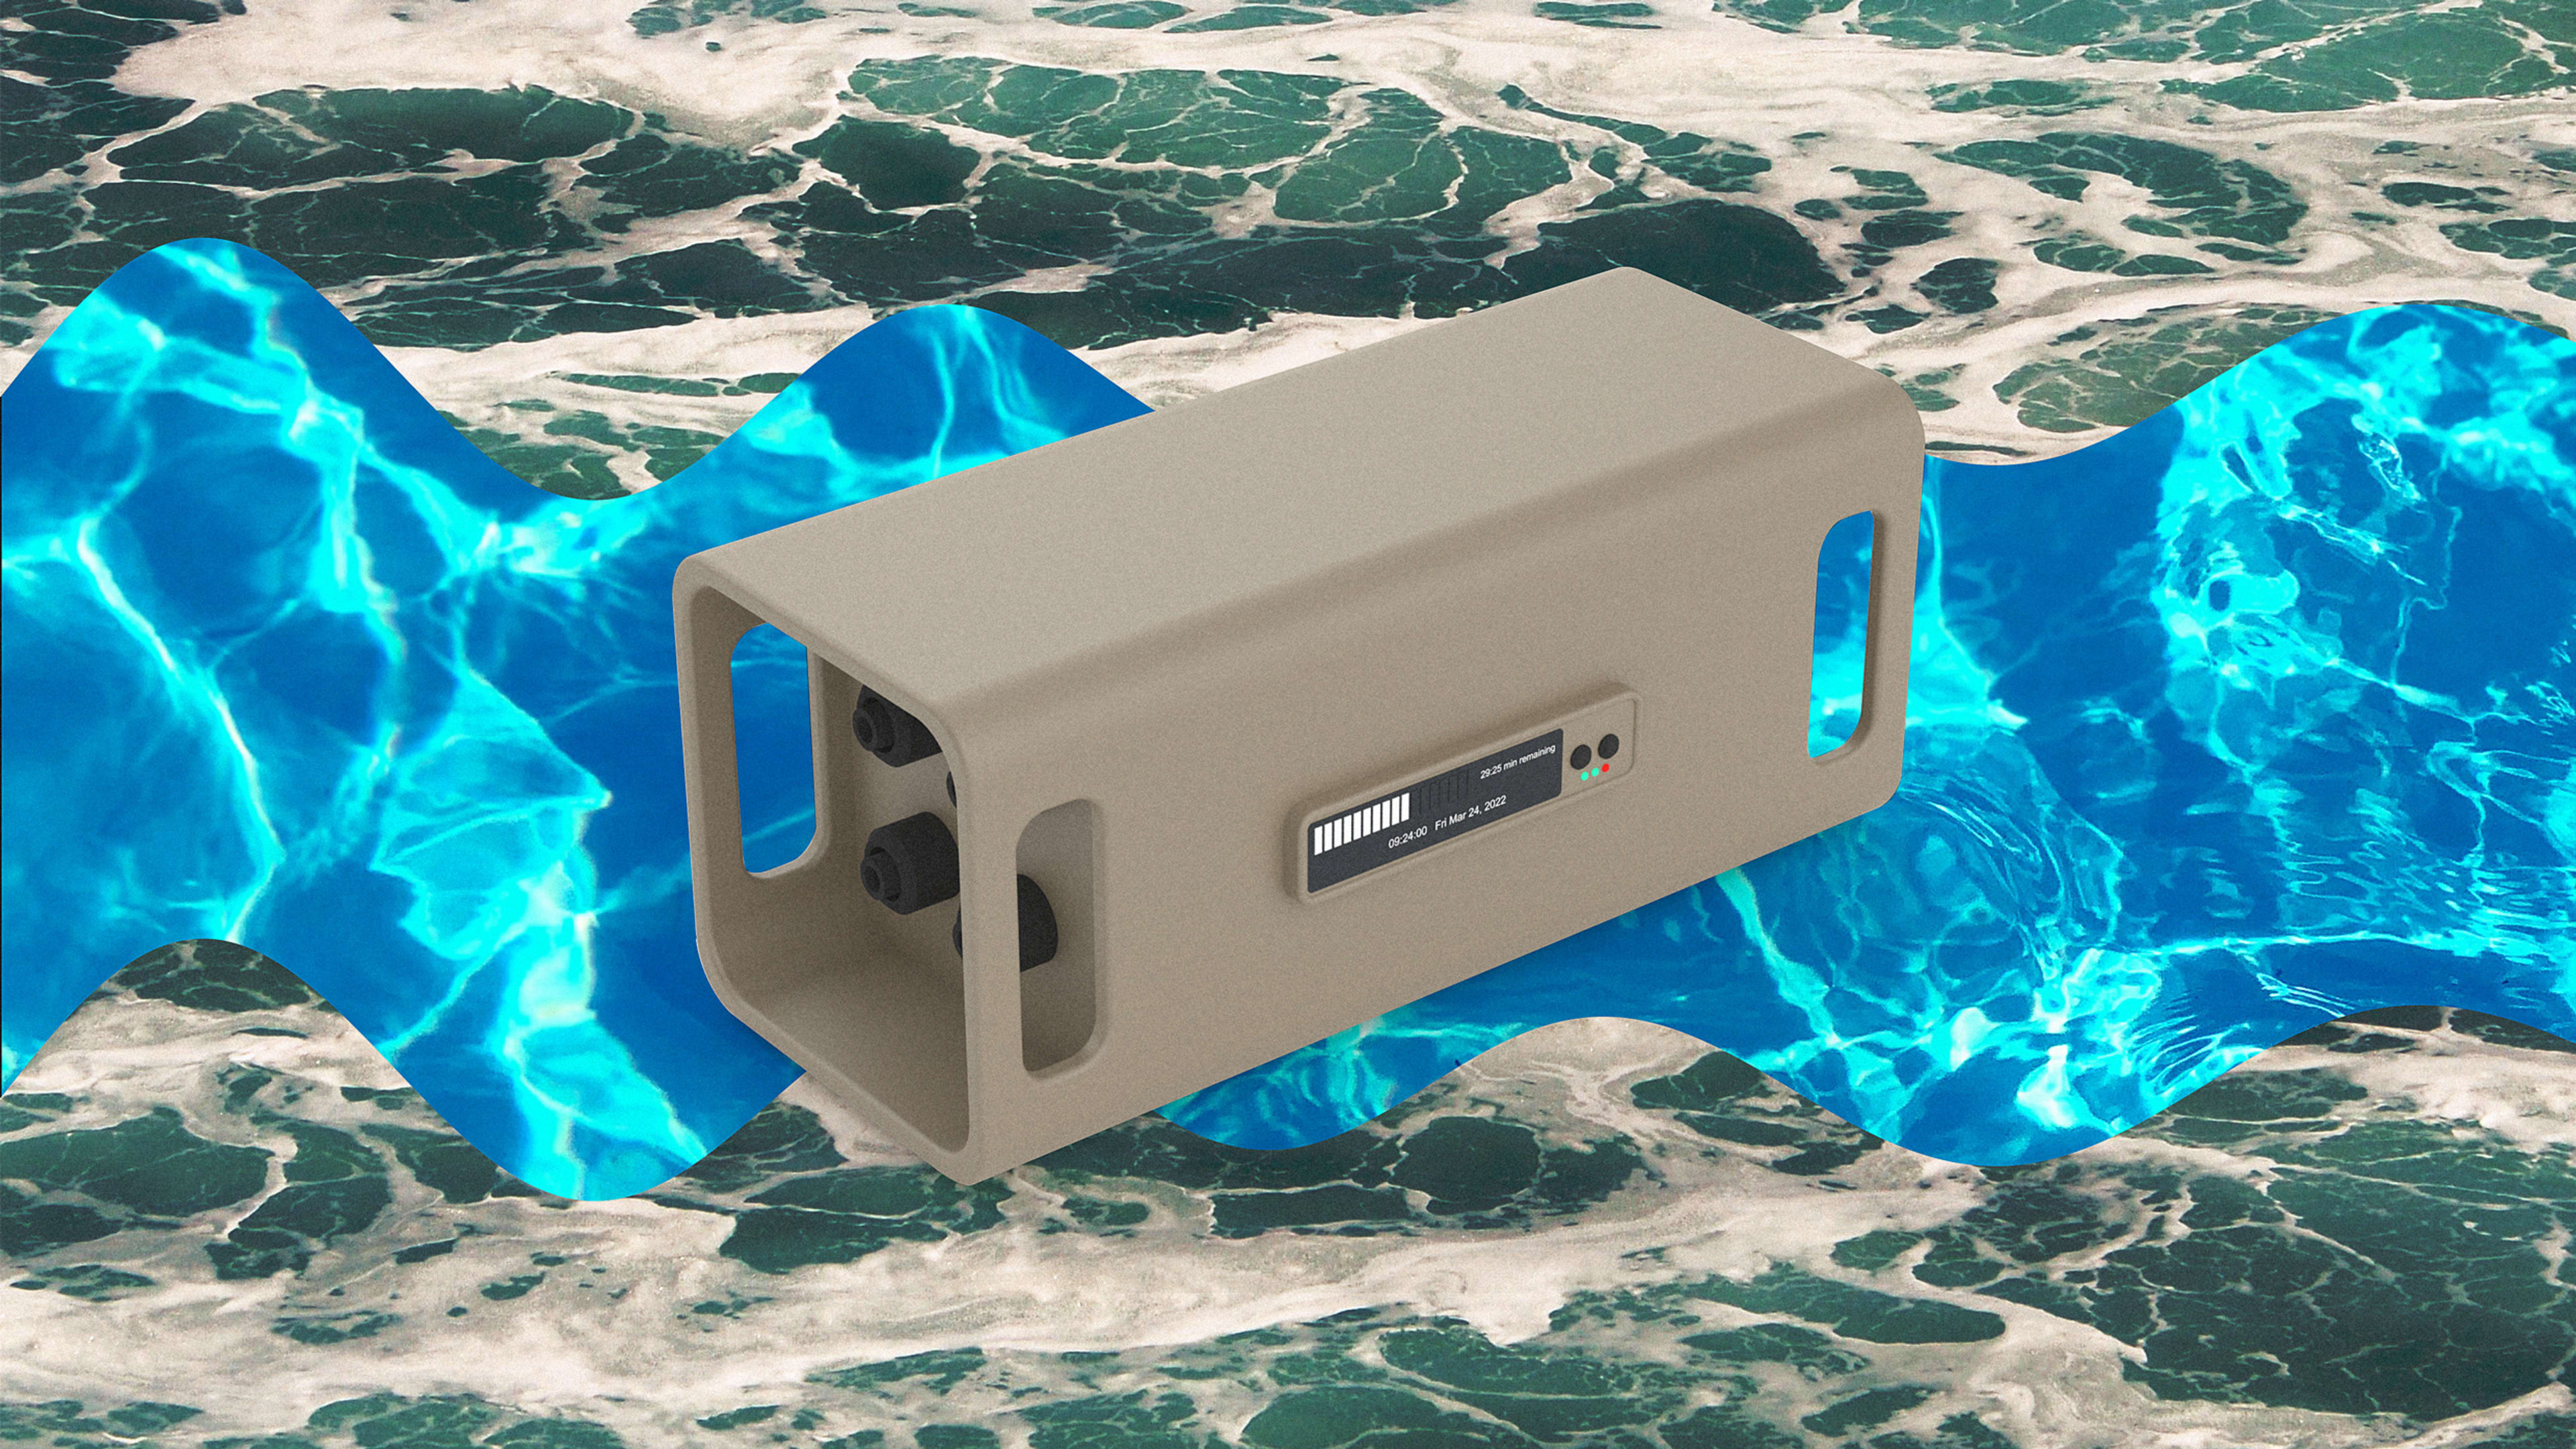 This portable device can turn saltwater into drinking water at the touch of a button